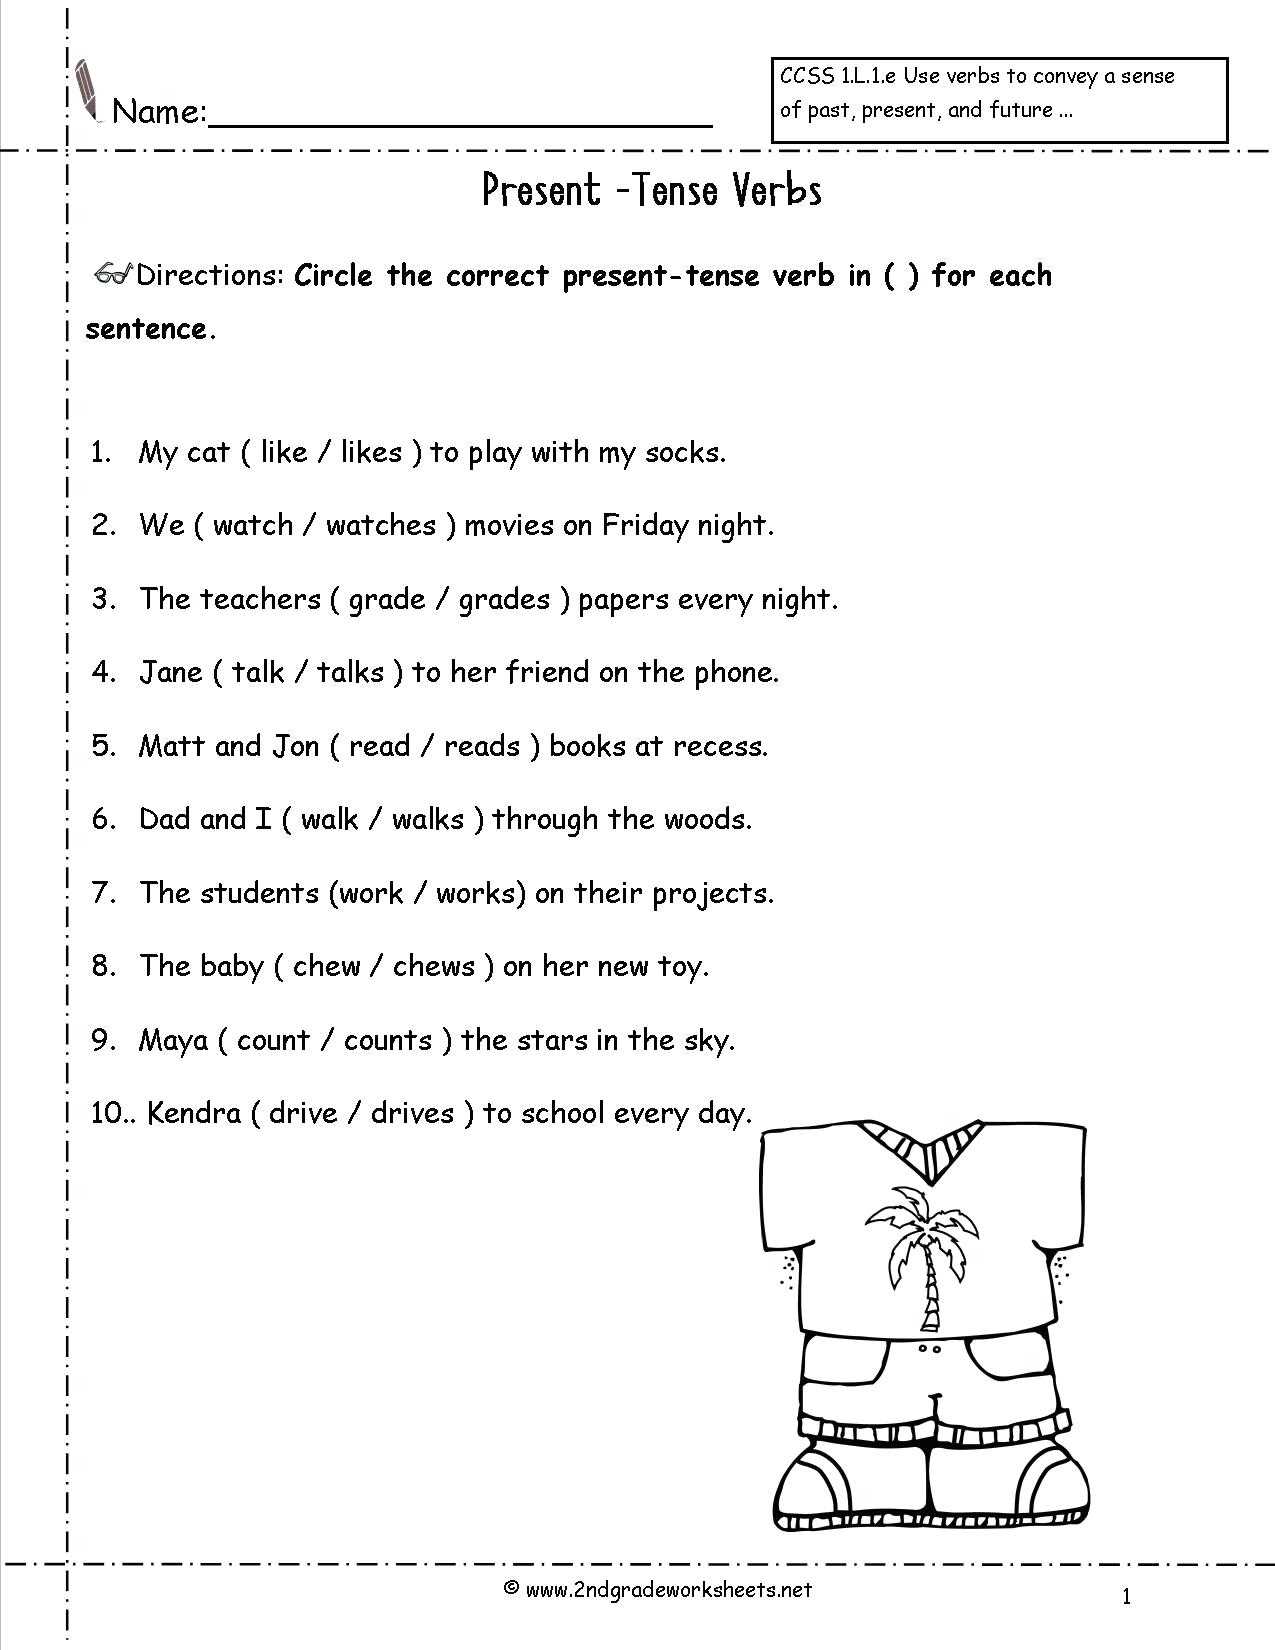 Spanish Verb Conjugation Practice Worksheets and Past Present and Future Tense Verbs Worksheets for 2nd Grade the